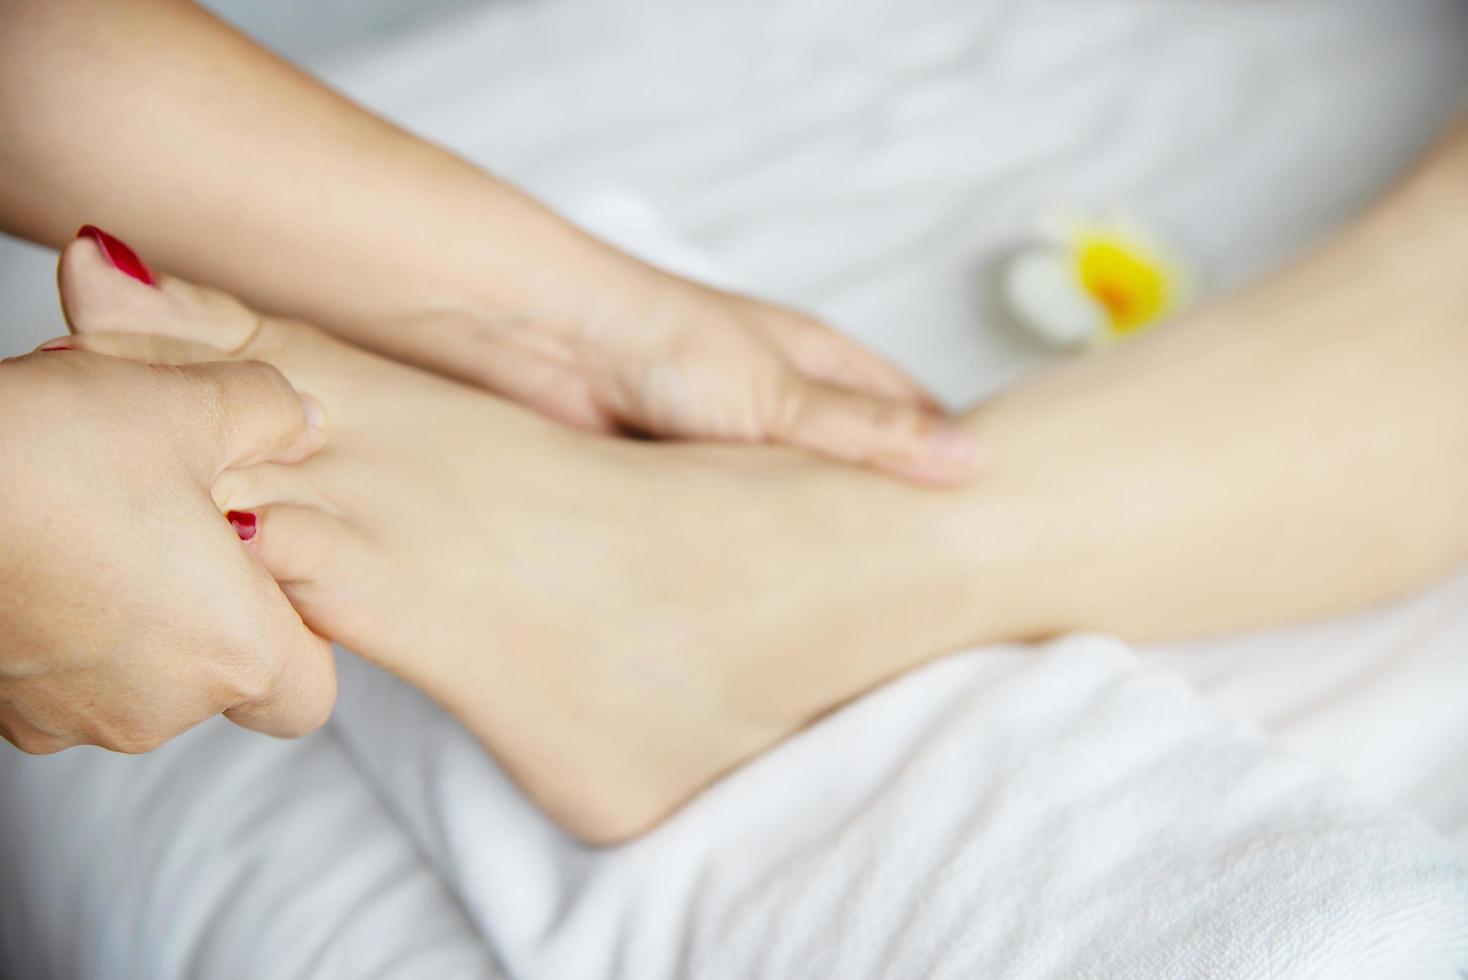 Woman receiving foot massage service from masseuse close up at hand and foot - relax in foot massage therapy service concept photo